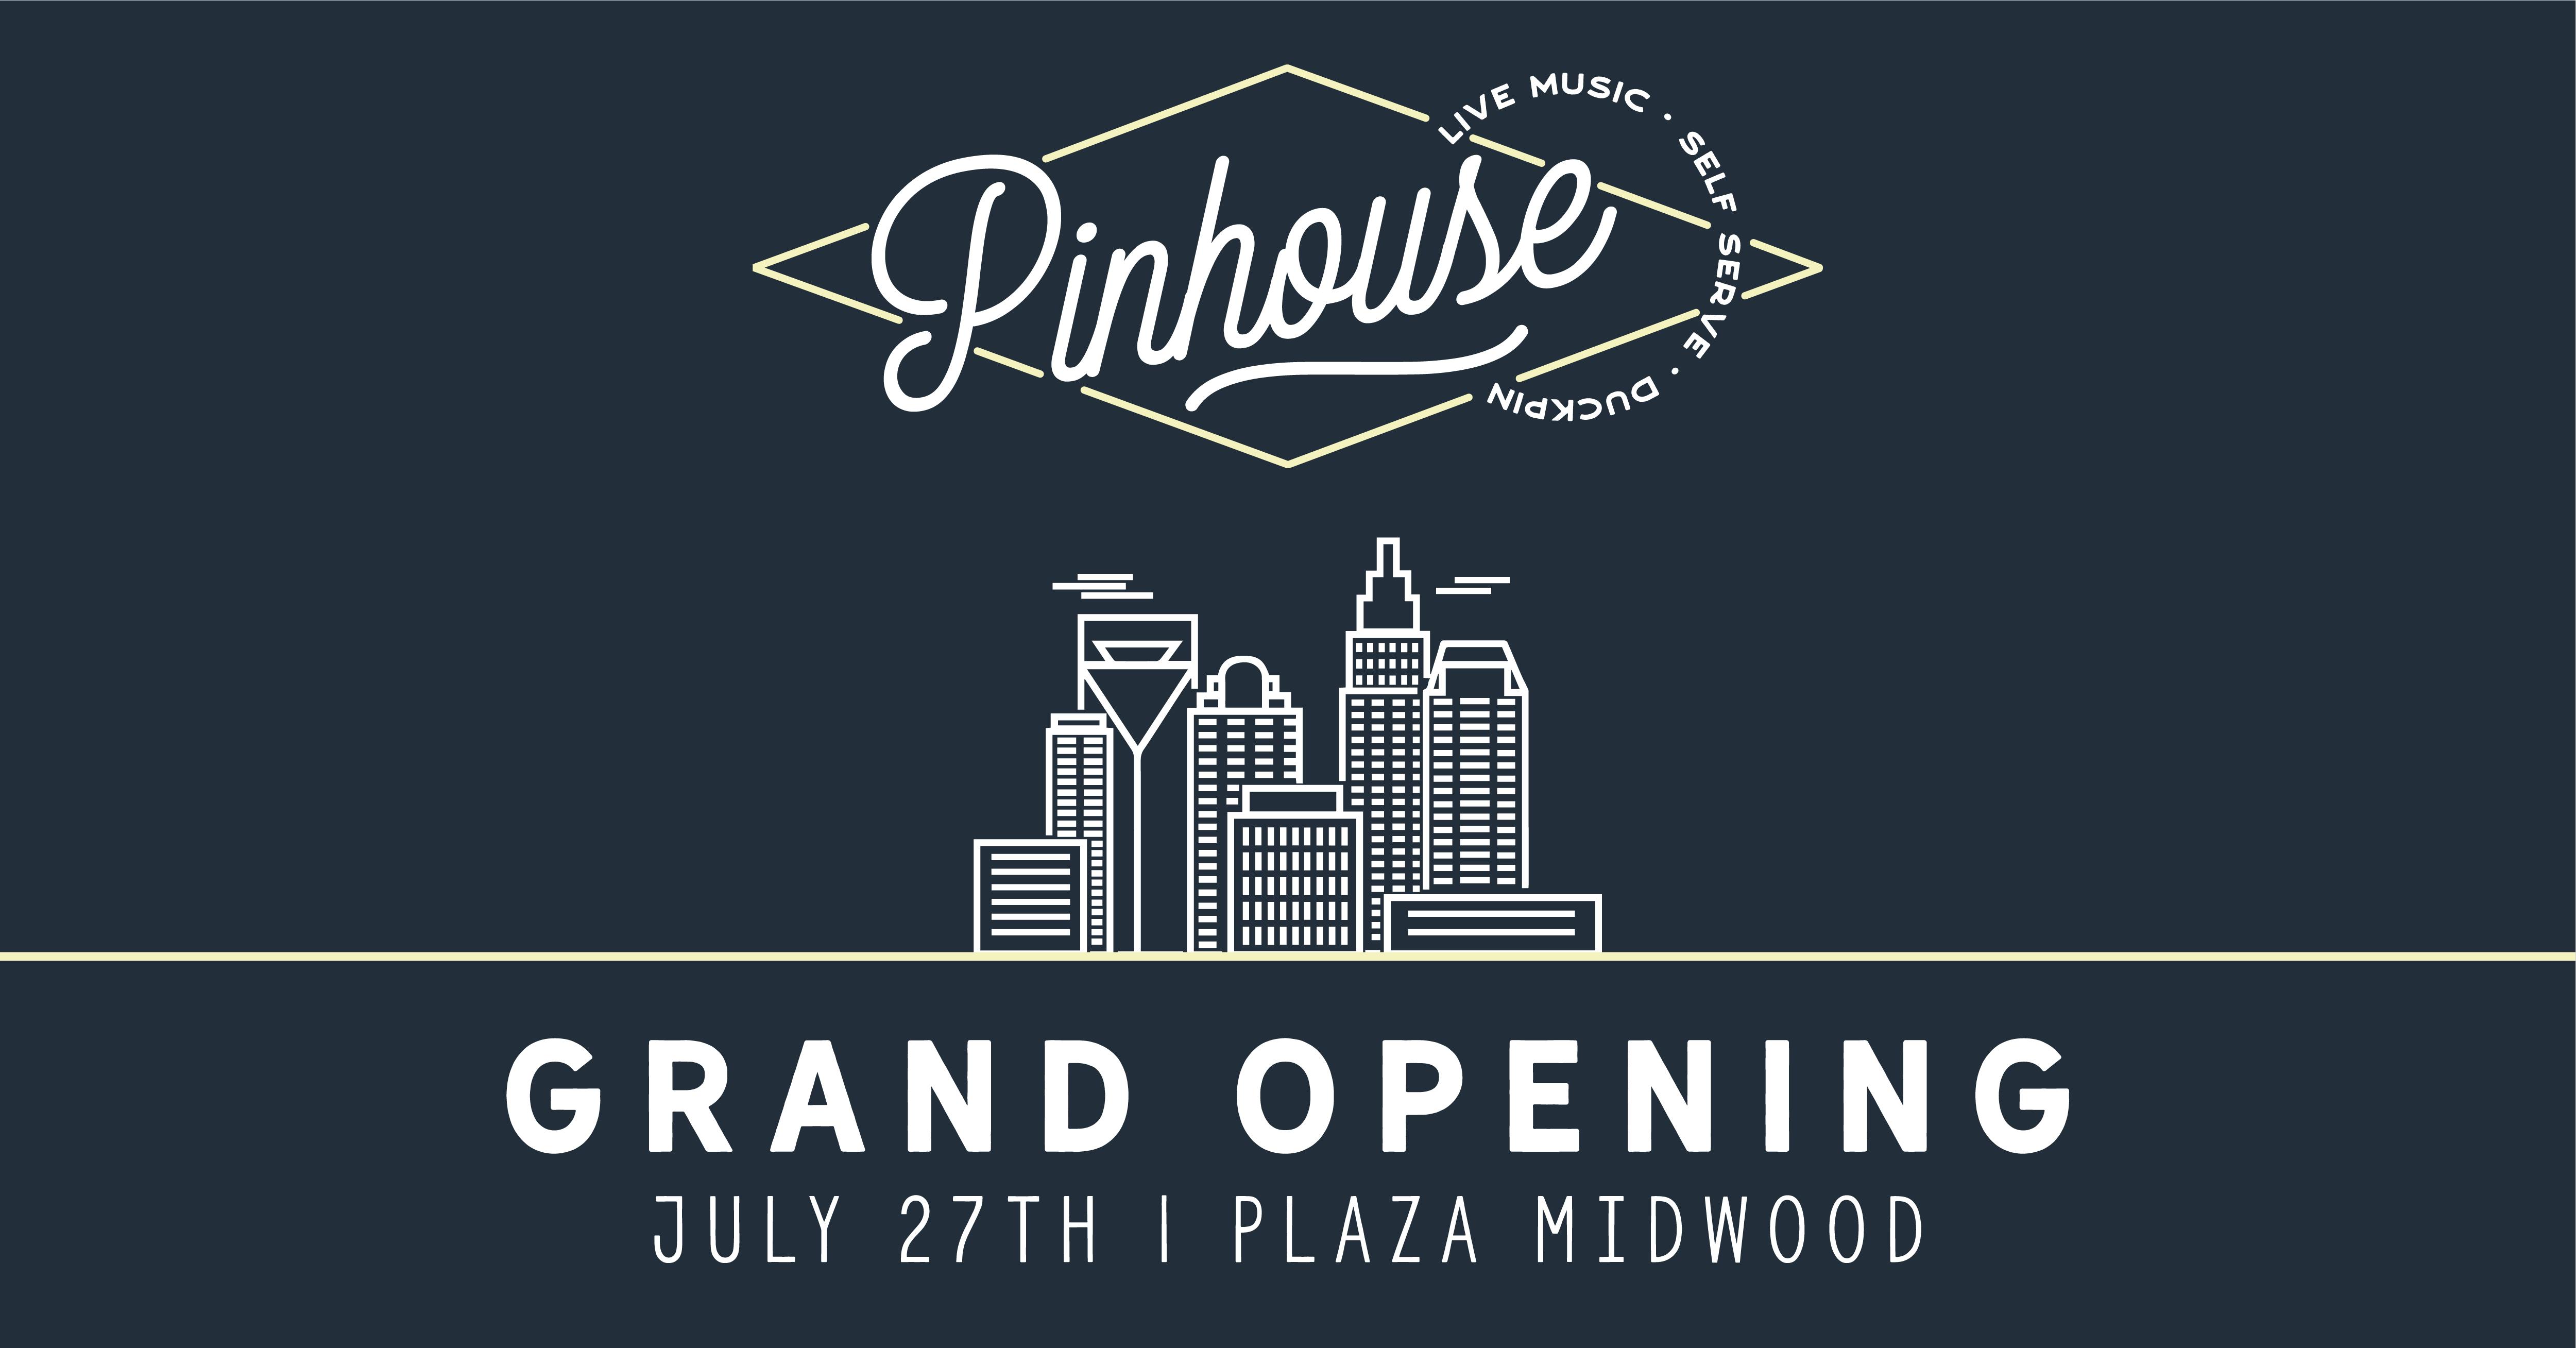 Pinhouse Grand Opening Party